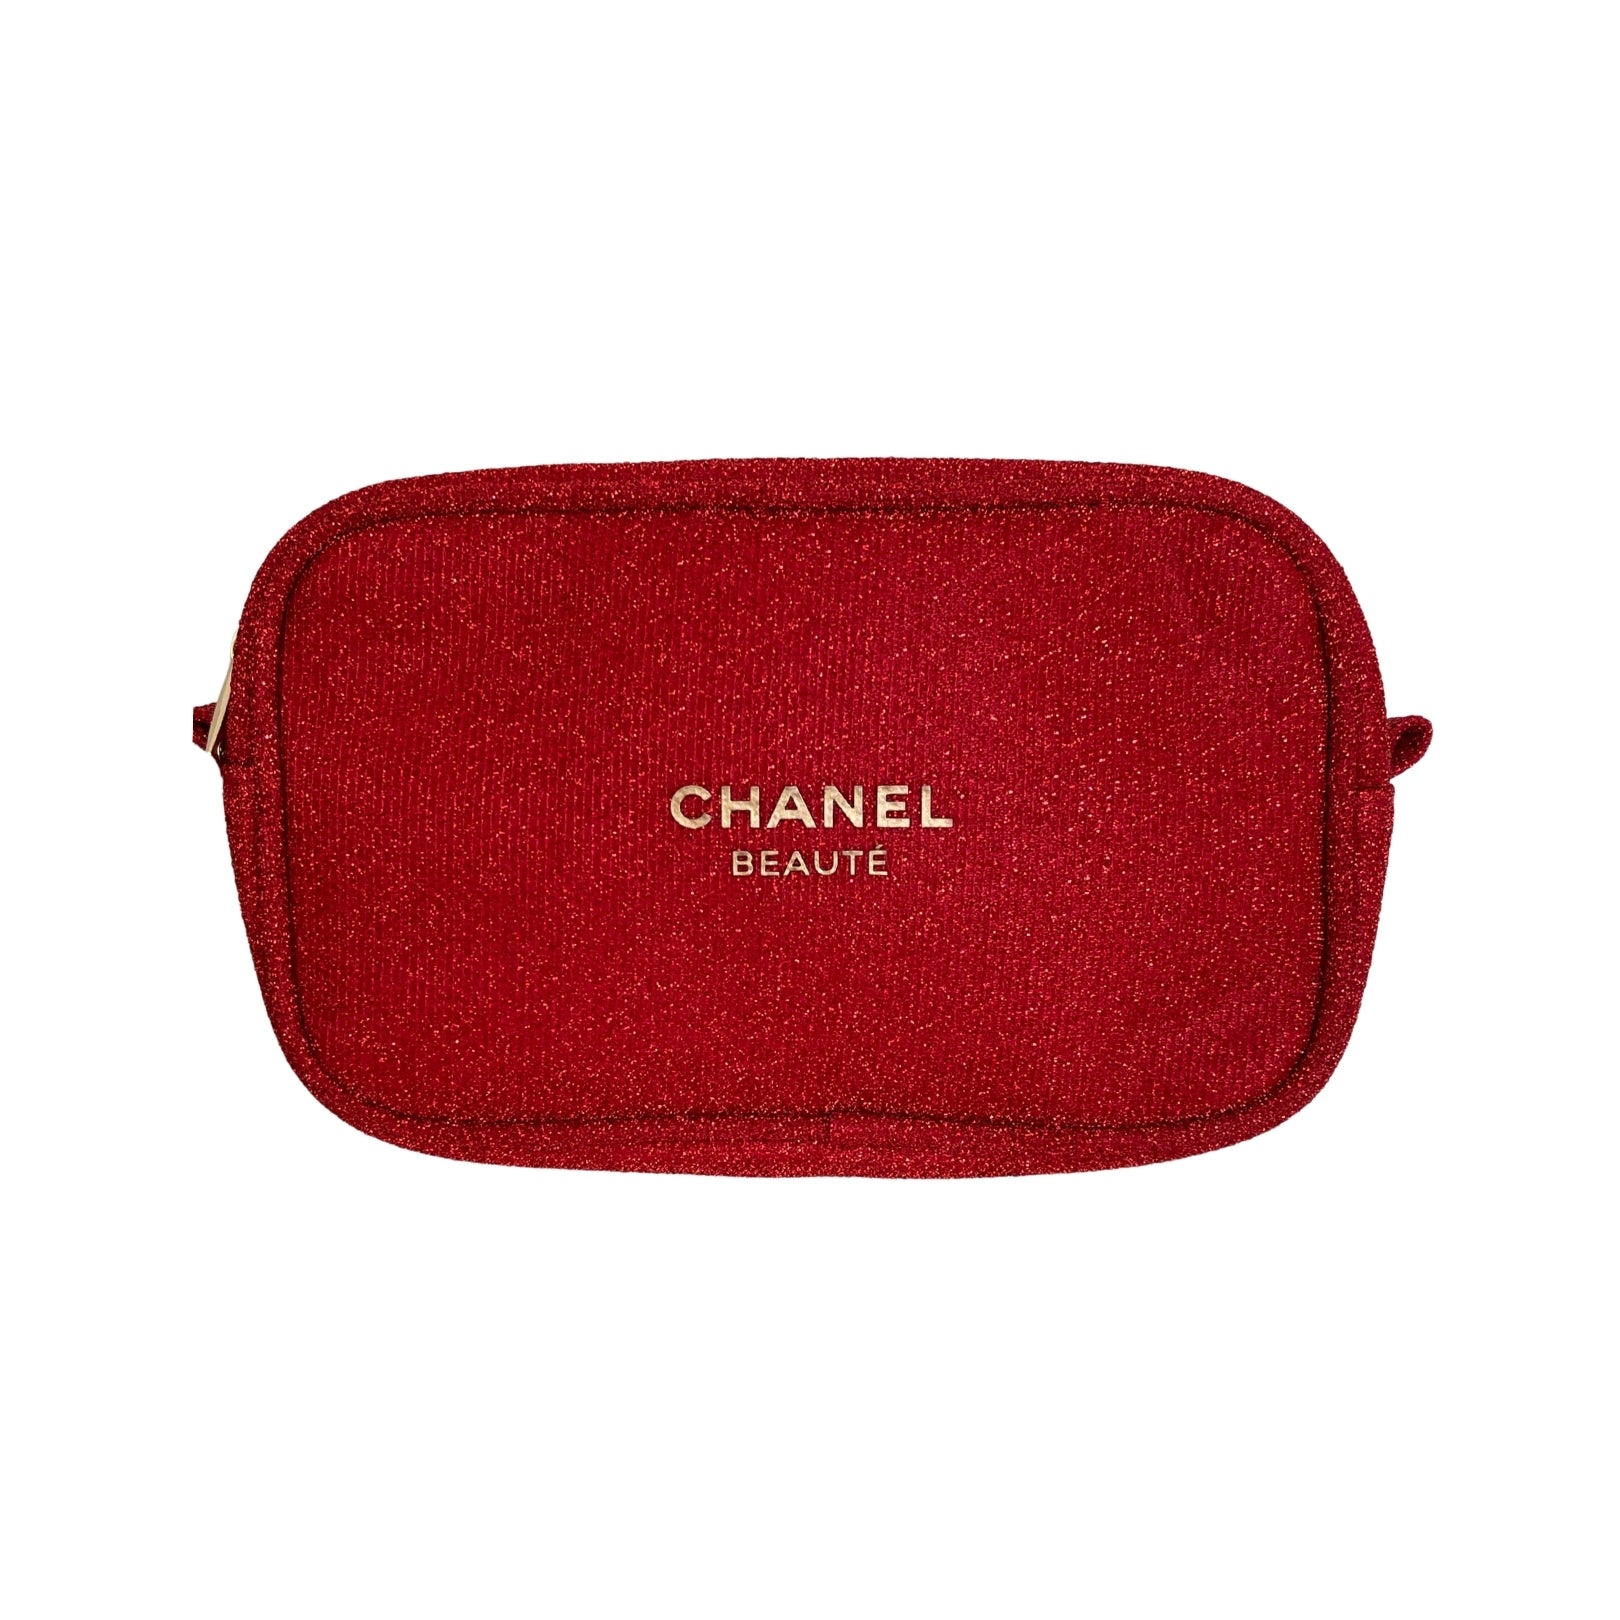 Chanel Toiletry Cosmetic Bag Makeup Lipstick Bag Clutch Red Velvet Coin  Pouch